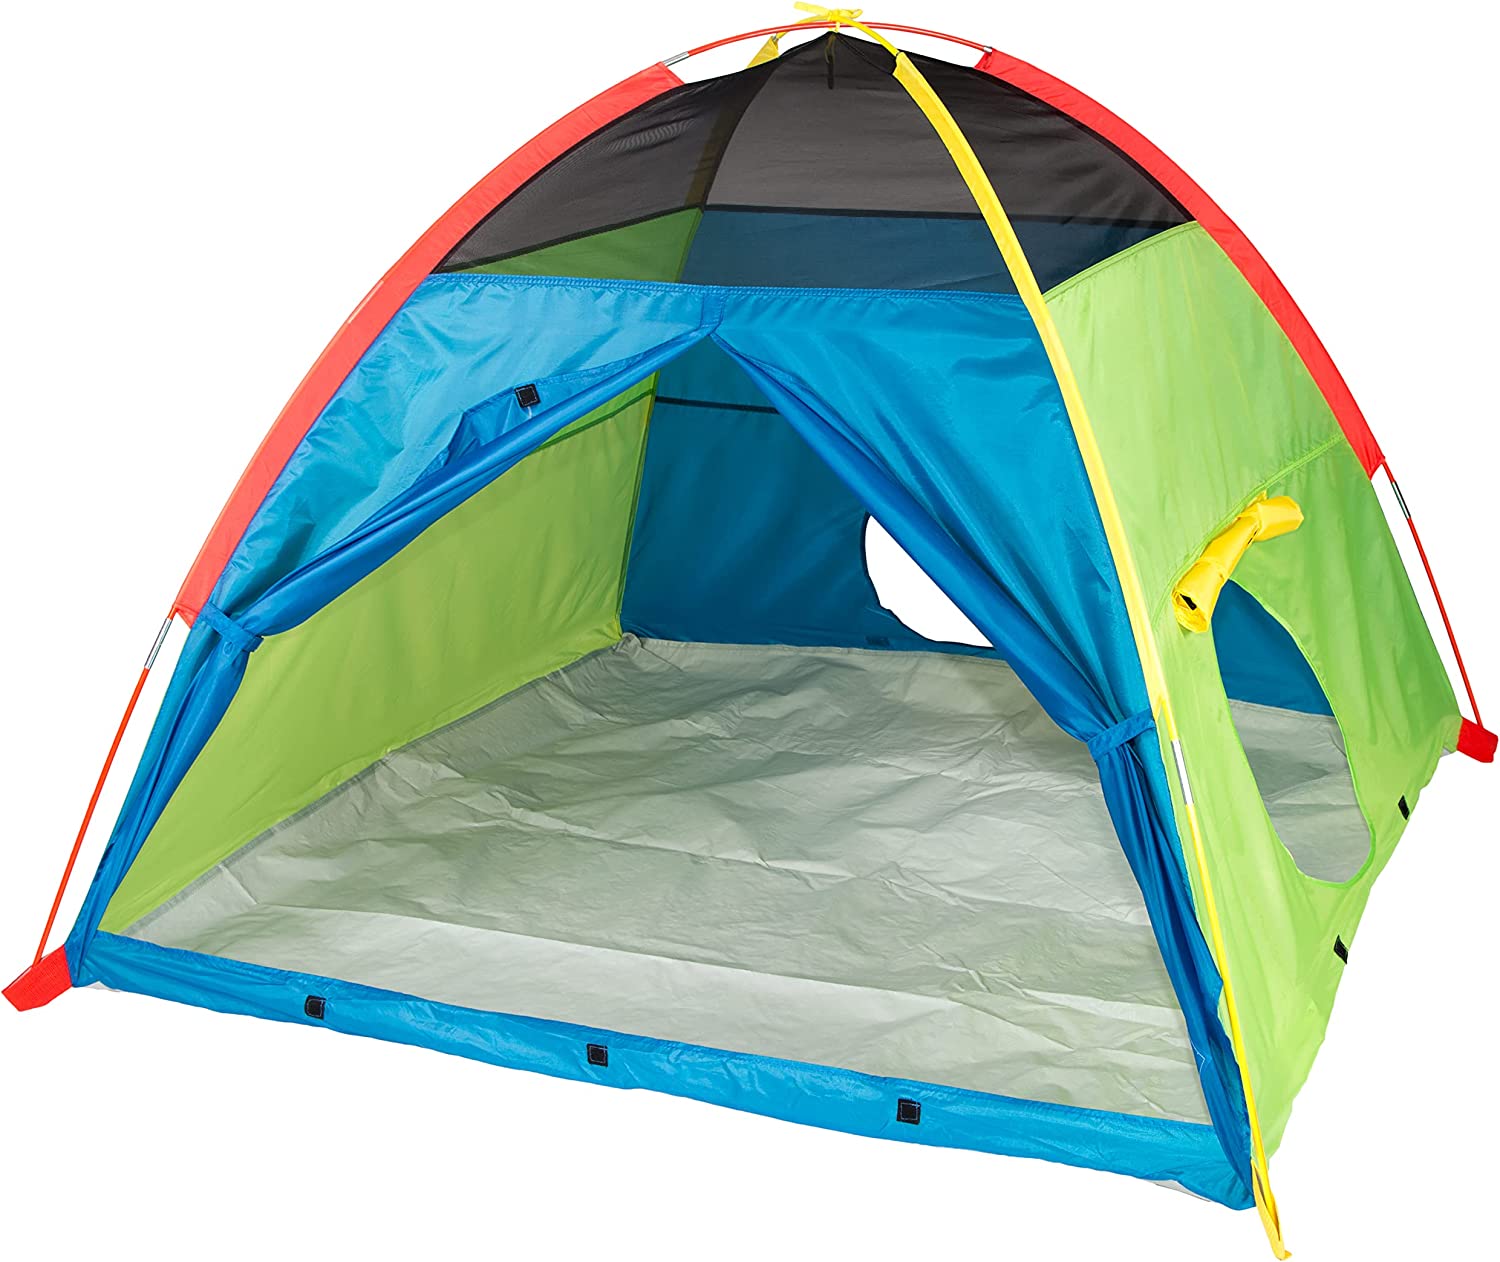 Small, inexpensive thing: tent